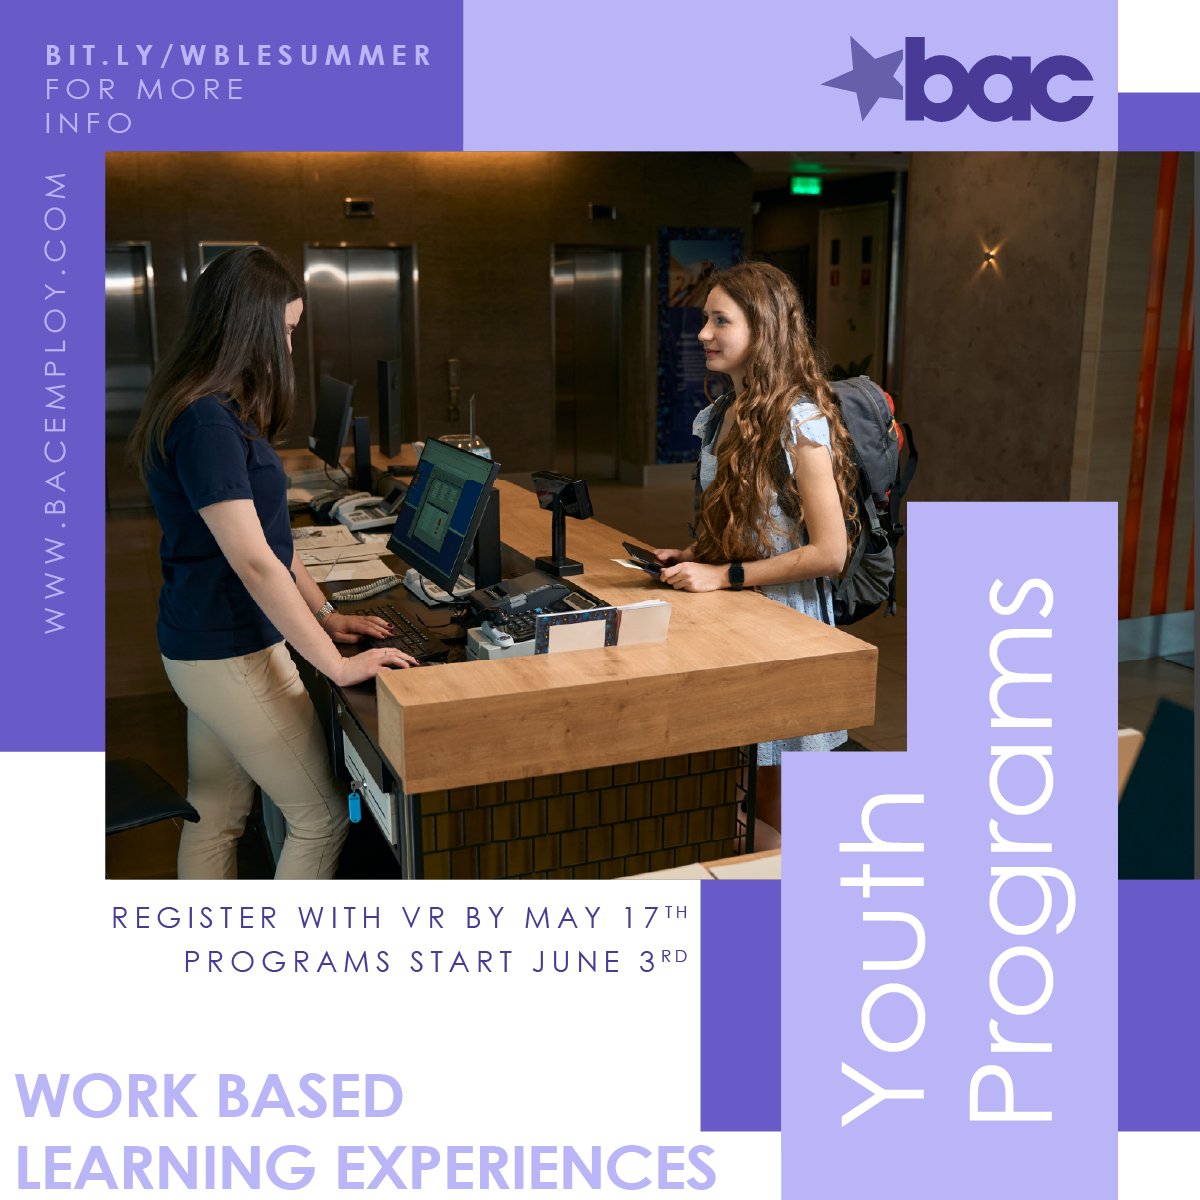 🌟 Discover your potential at BAC this summer! Gain experience as a Receptionist, Facilities or Teaching Assistant, and more. 🎓 📅 June 3-27 & July 8-Aug 1 📍 Rockledge, FL ⏰ 9:00 AM - 2:30 PM Join us! More info: bit.ly/WBLESummer #FutureReady